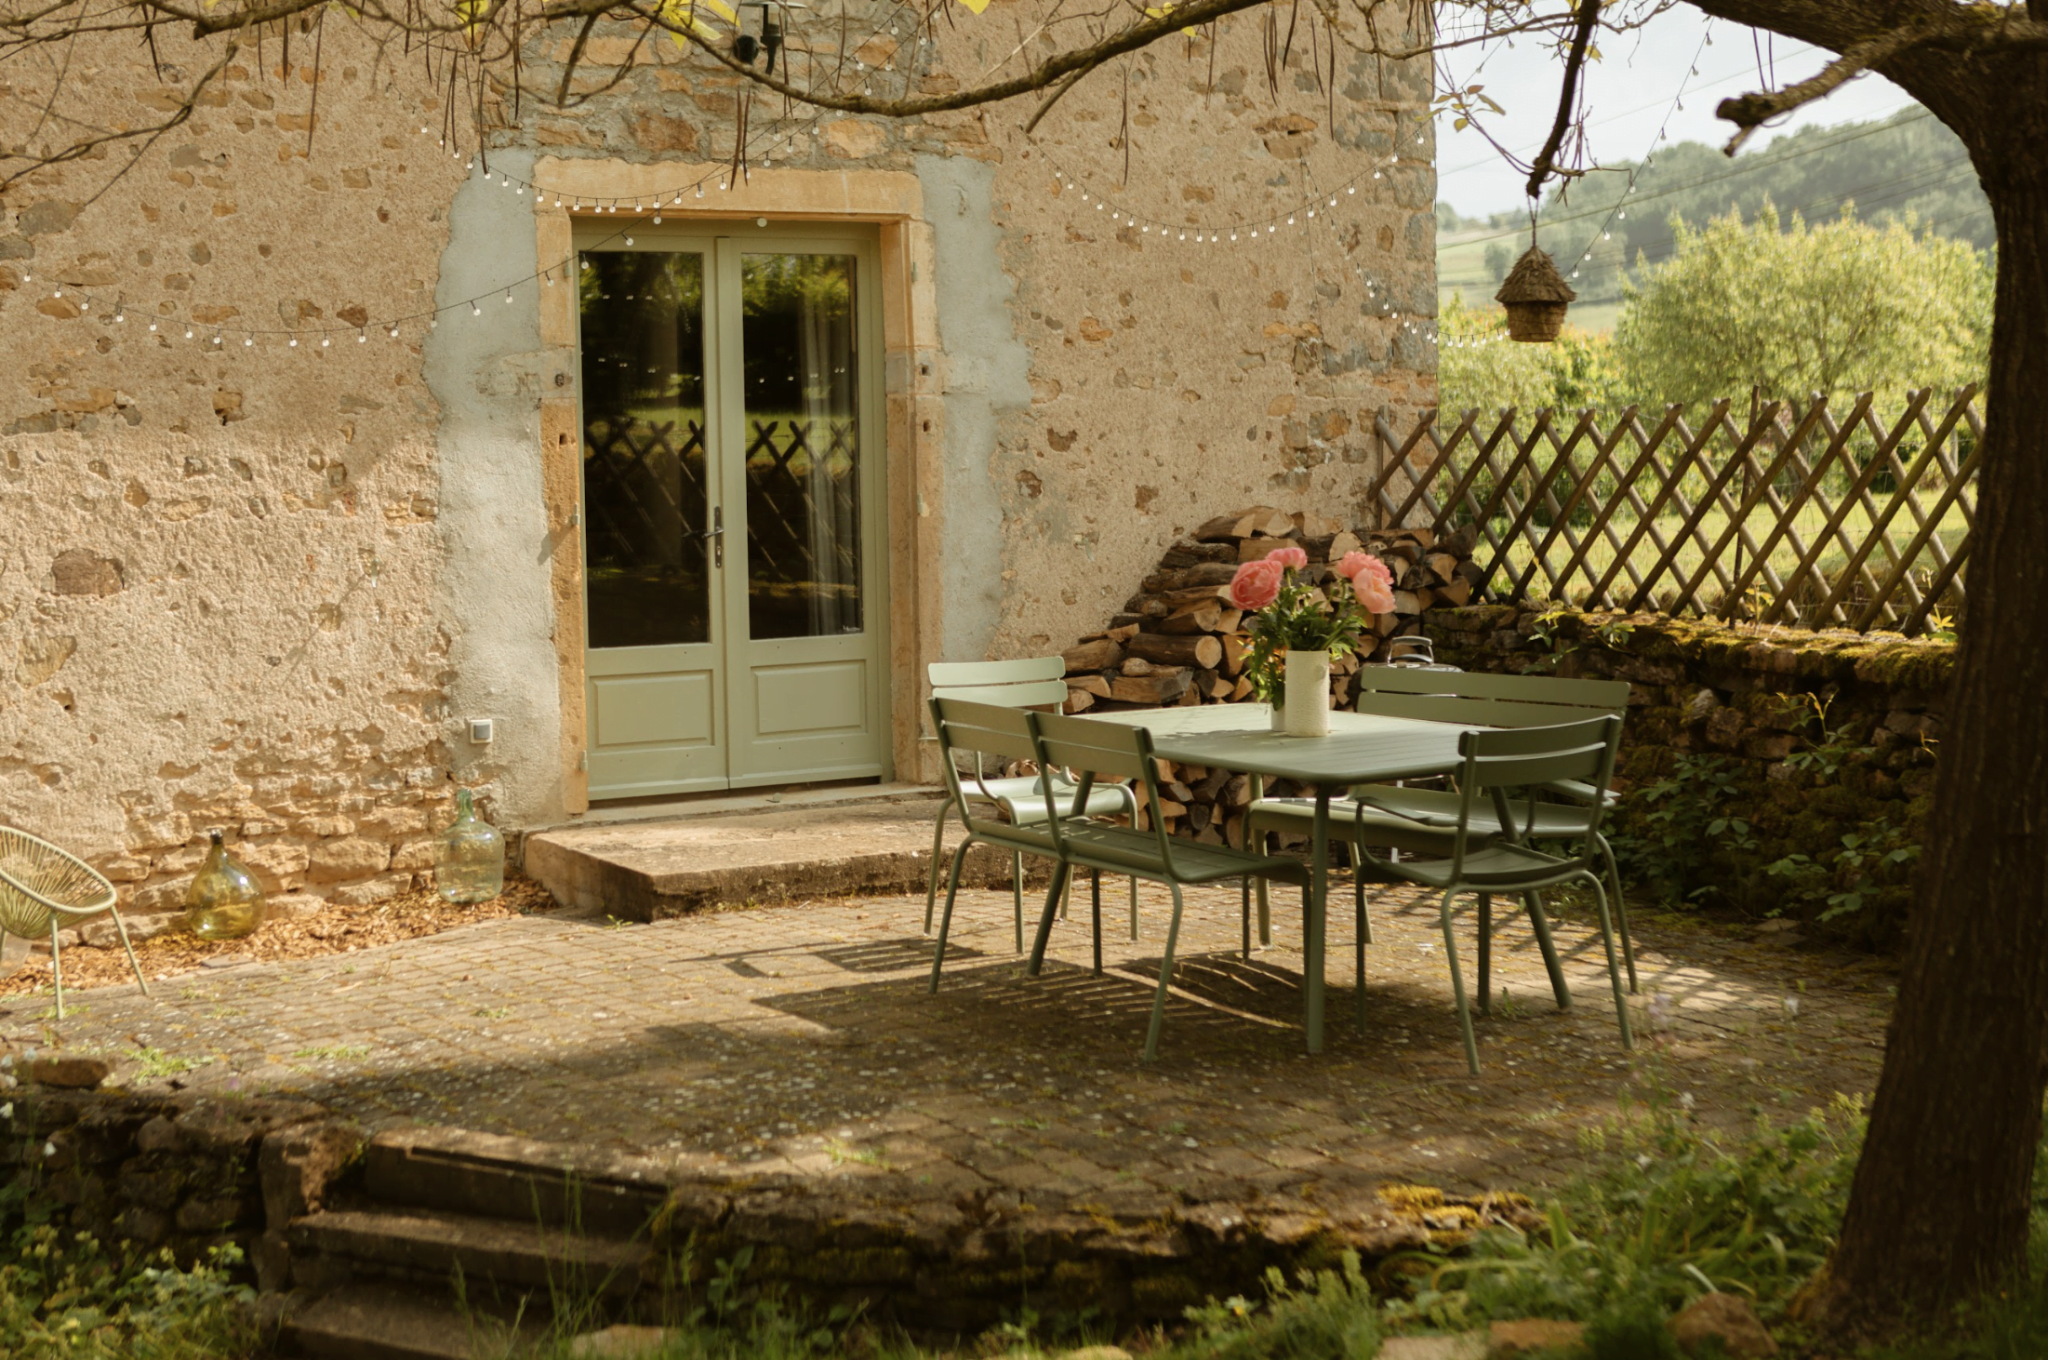 Table and garden chairs on the terrace, facade of a stone house.